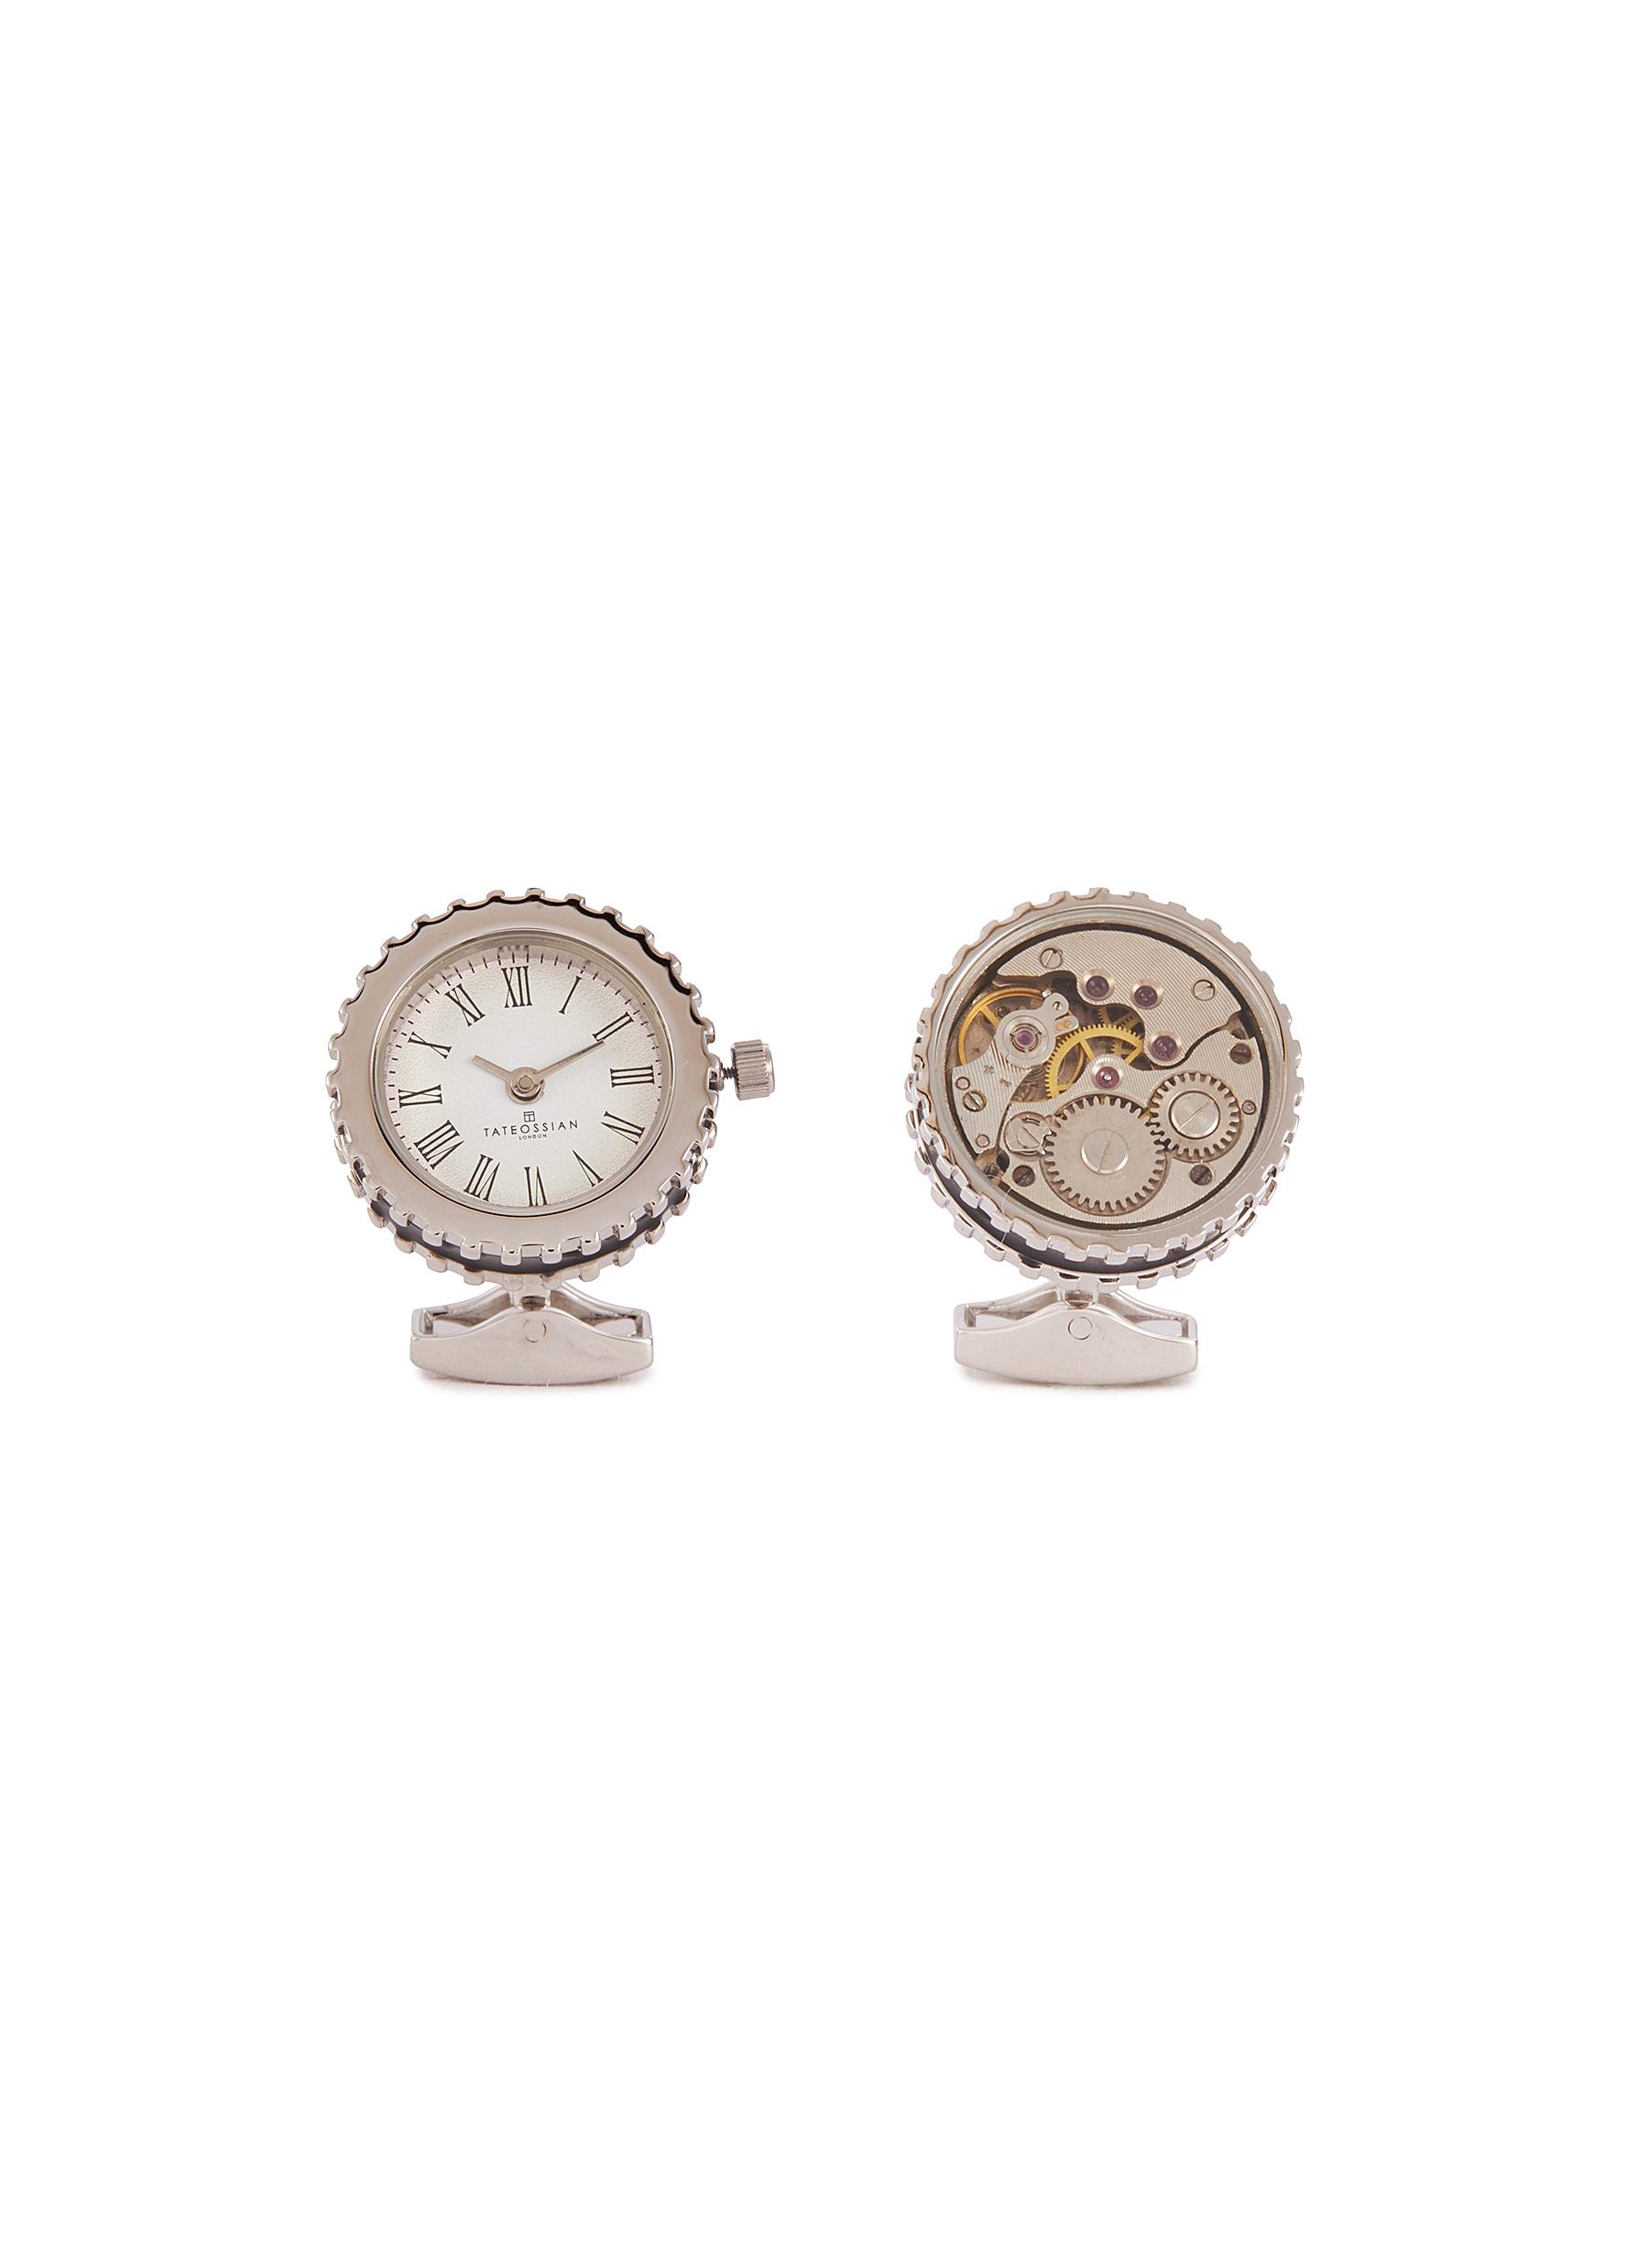 Personalised Vintage Watch Movement Cufflinks By Charlie Boots |  notonthehighstreet.com